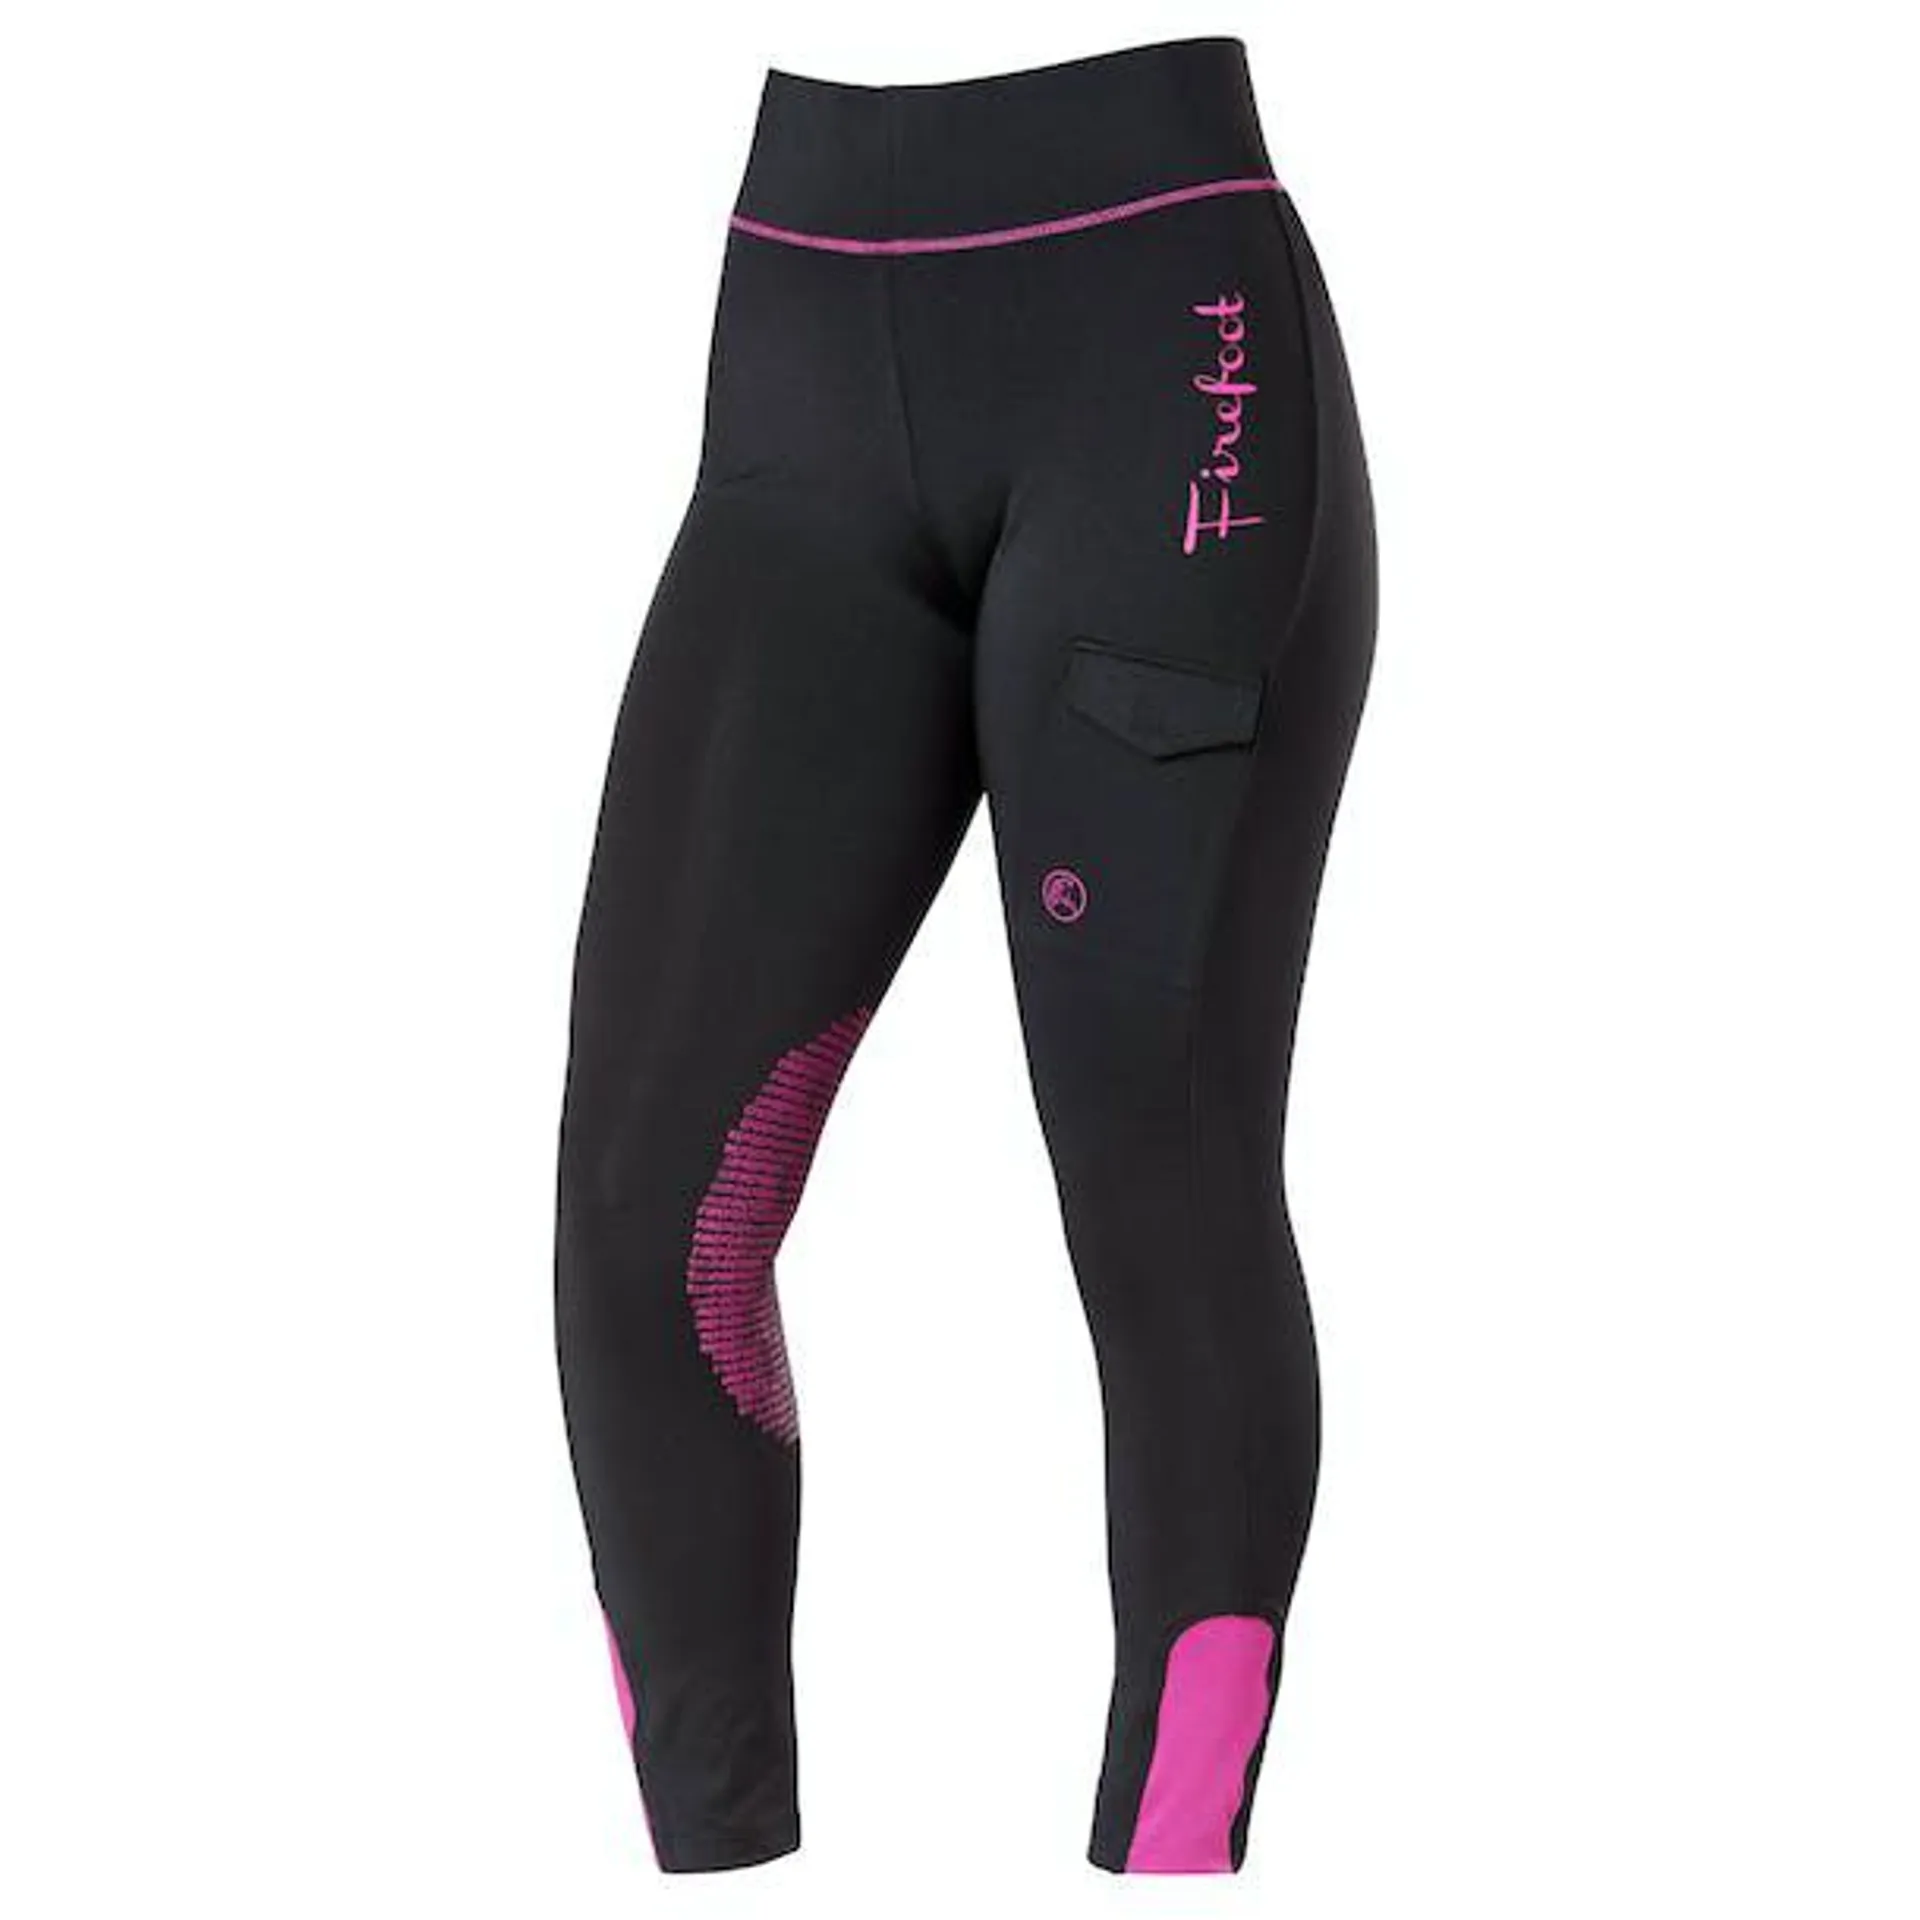 Firefoot Bankfield Basic Womens Riding Tights